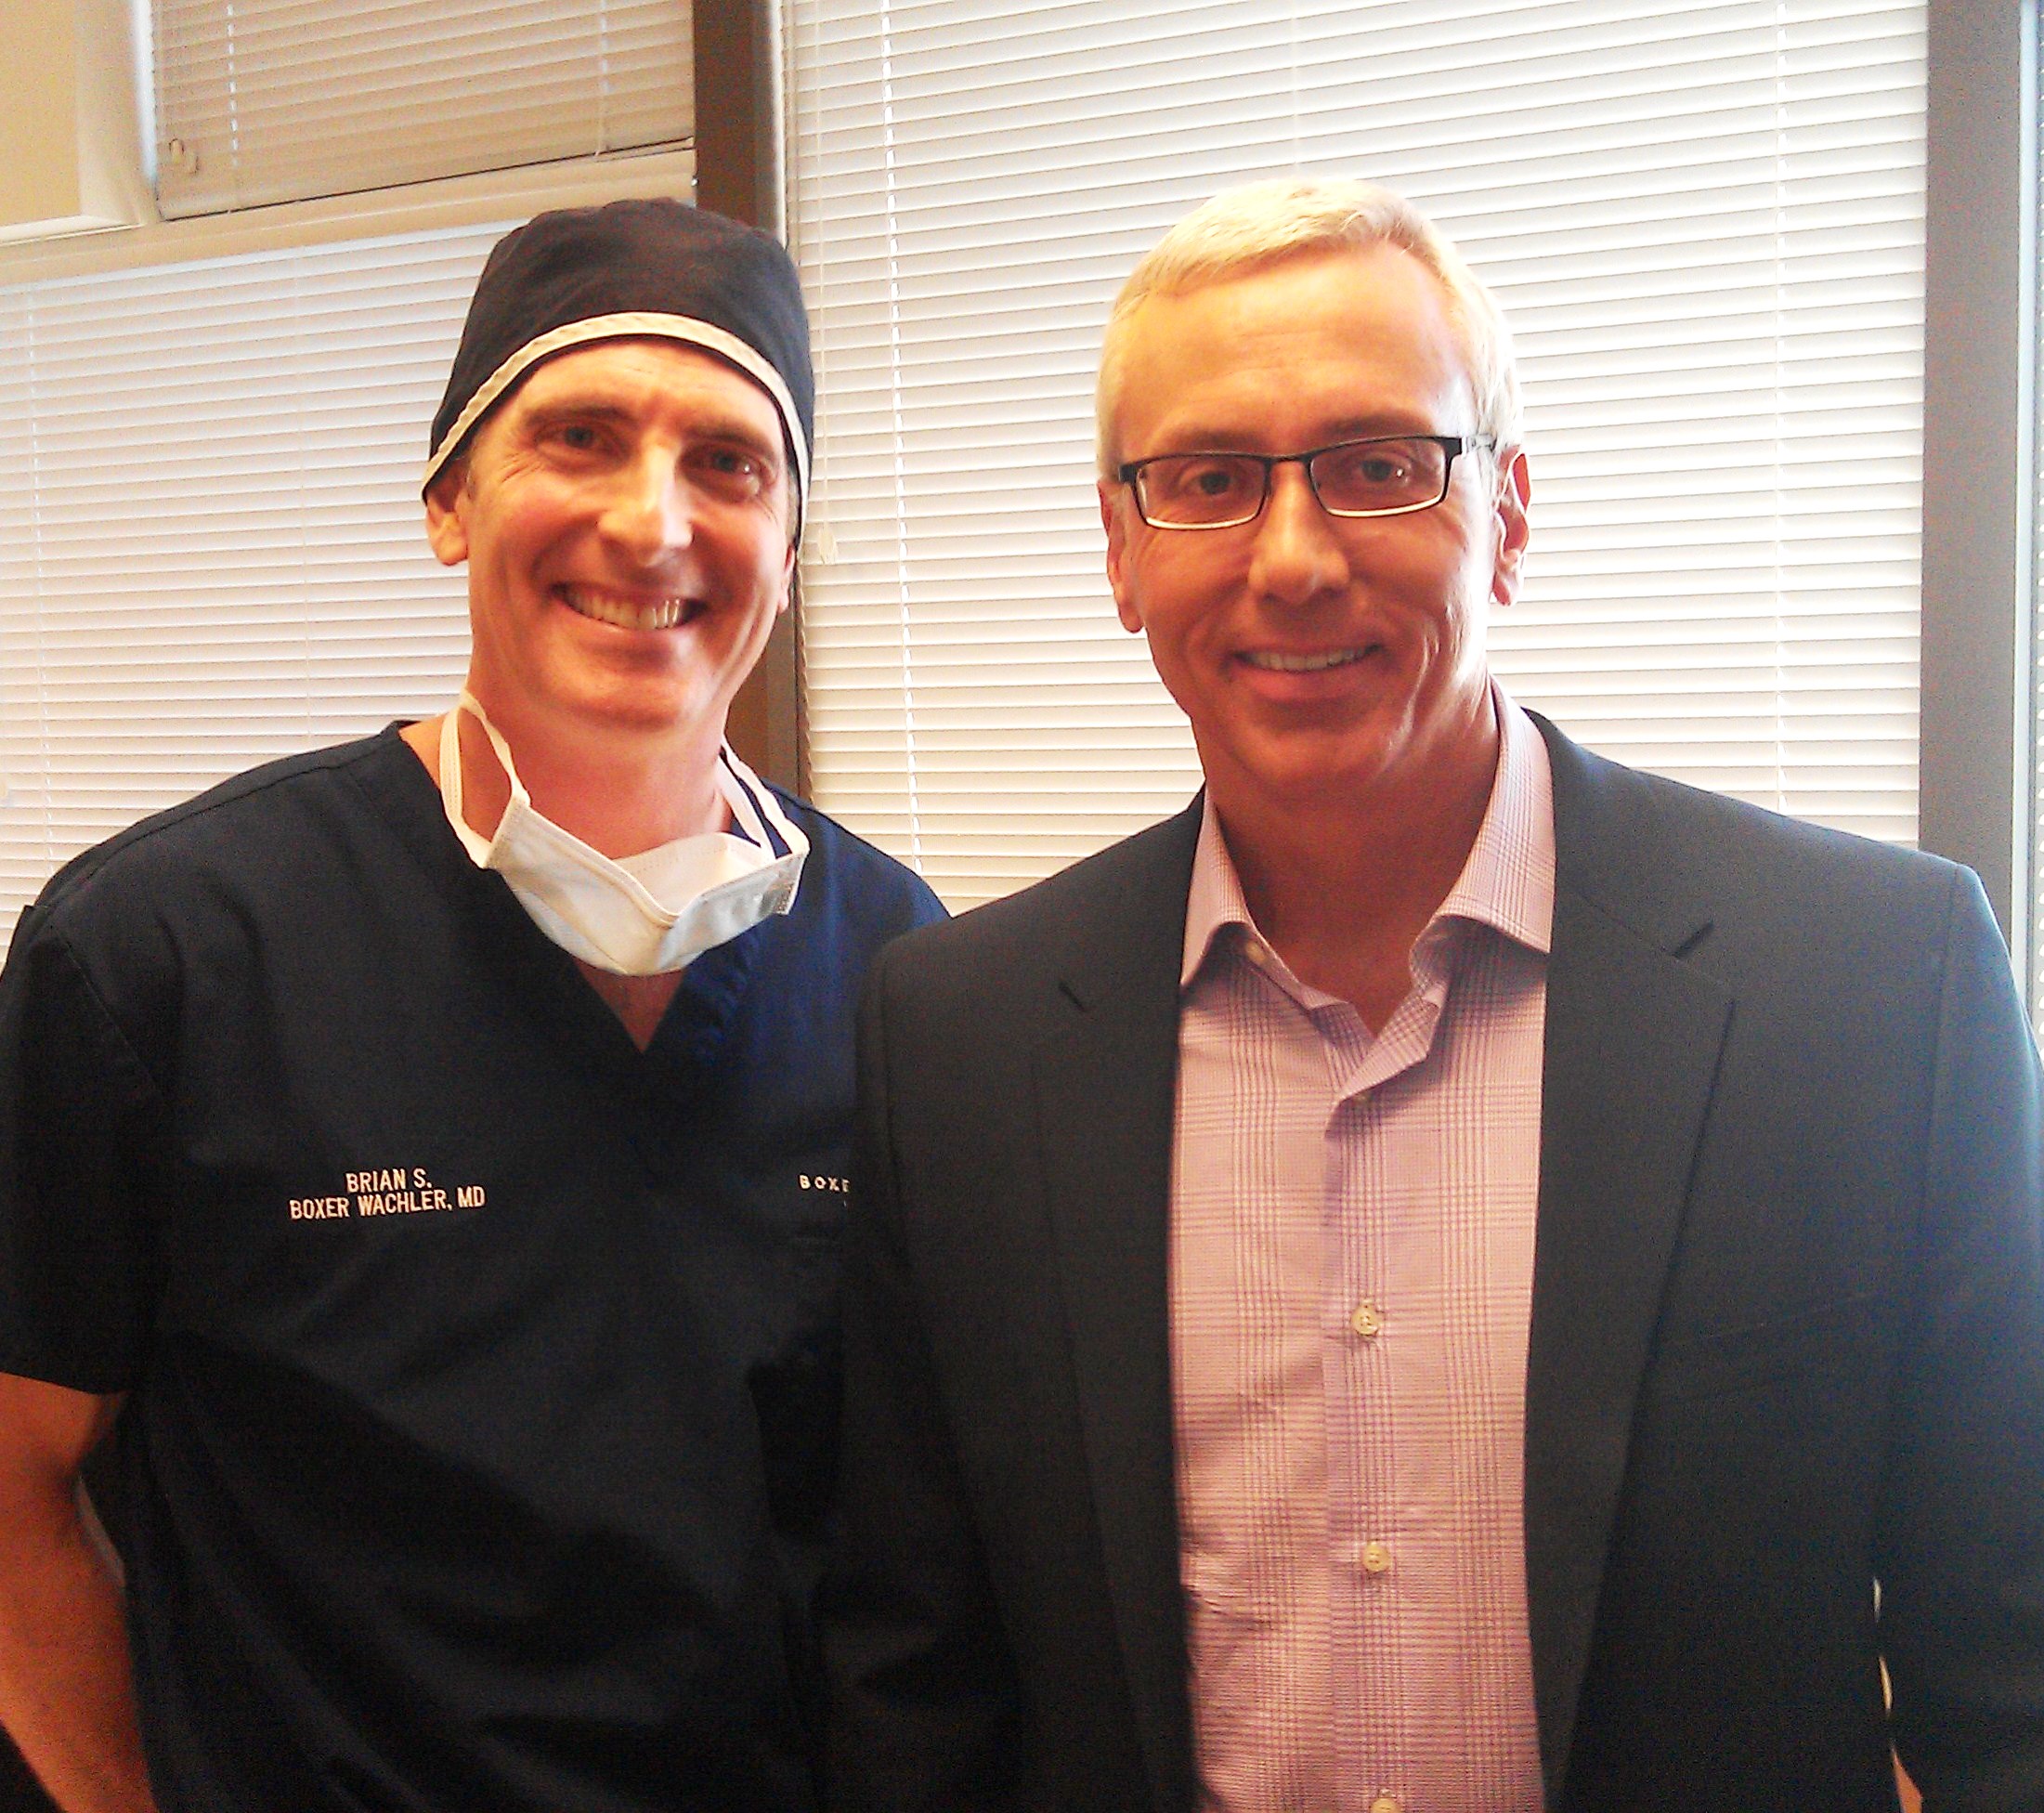 Dr. Drew and Dr Brian Boxer Wachler at his Beverly Hills practice